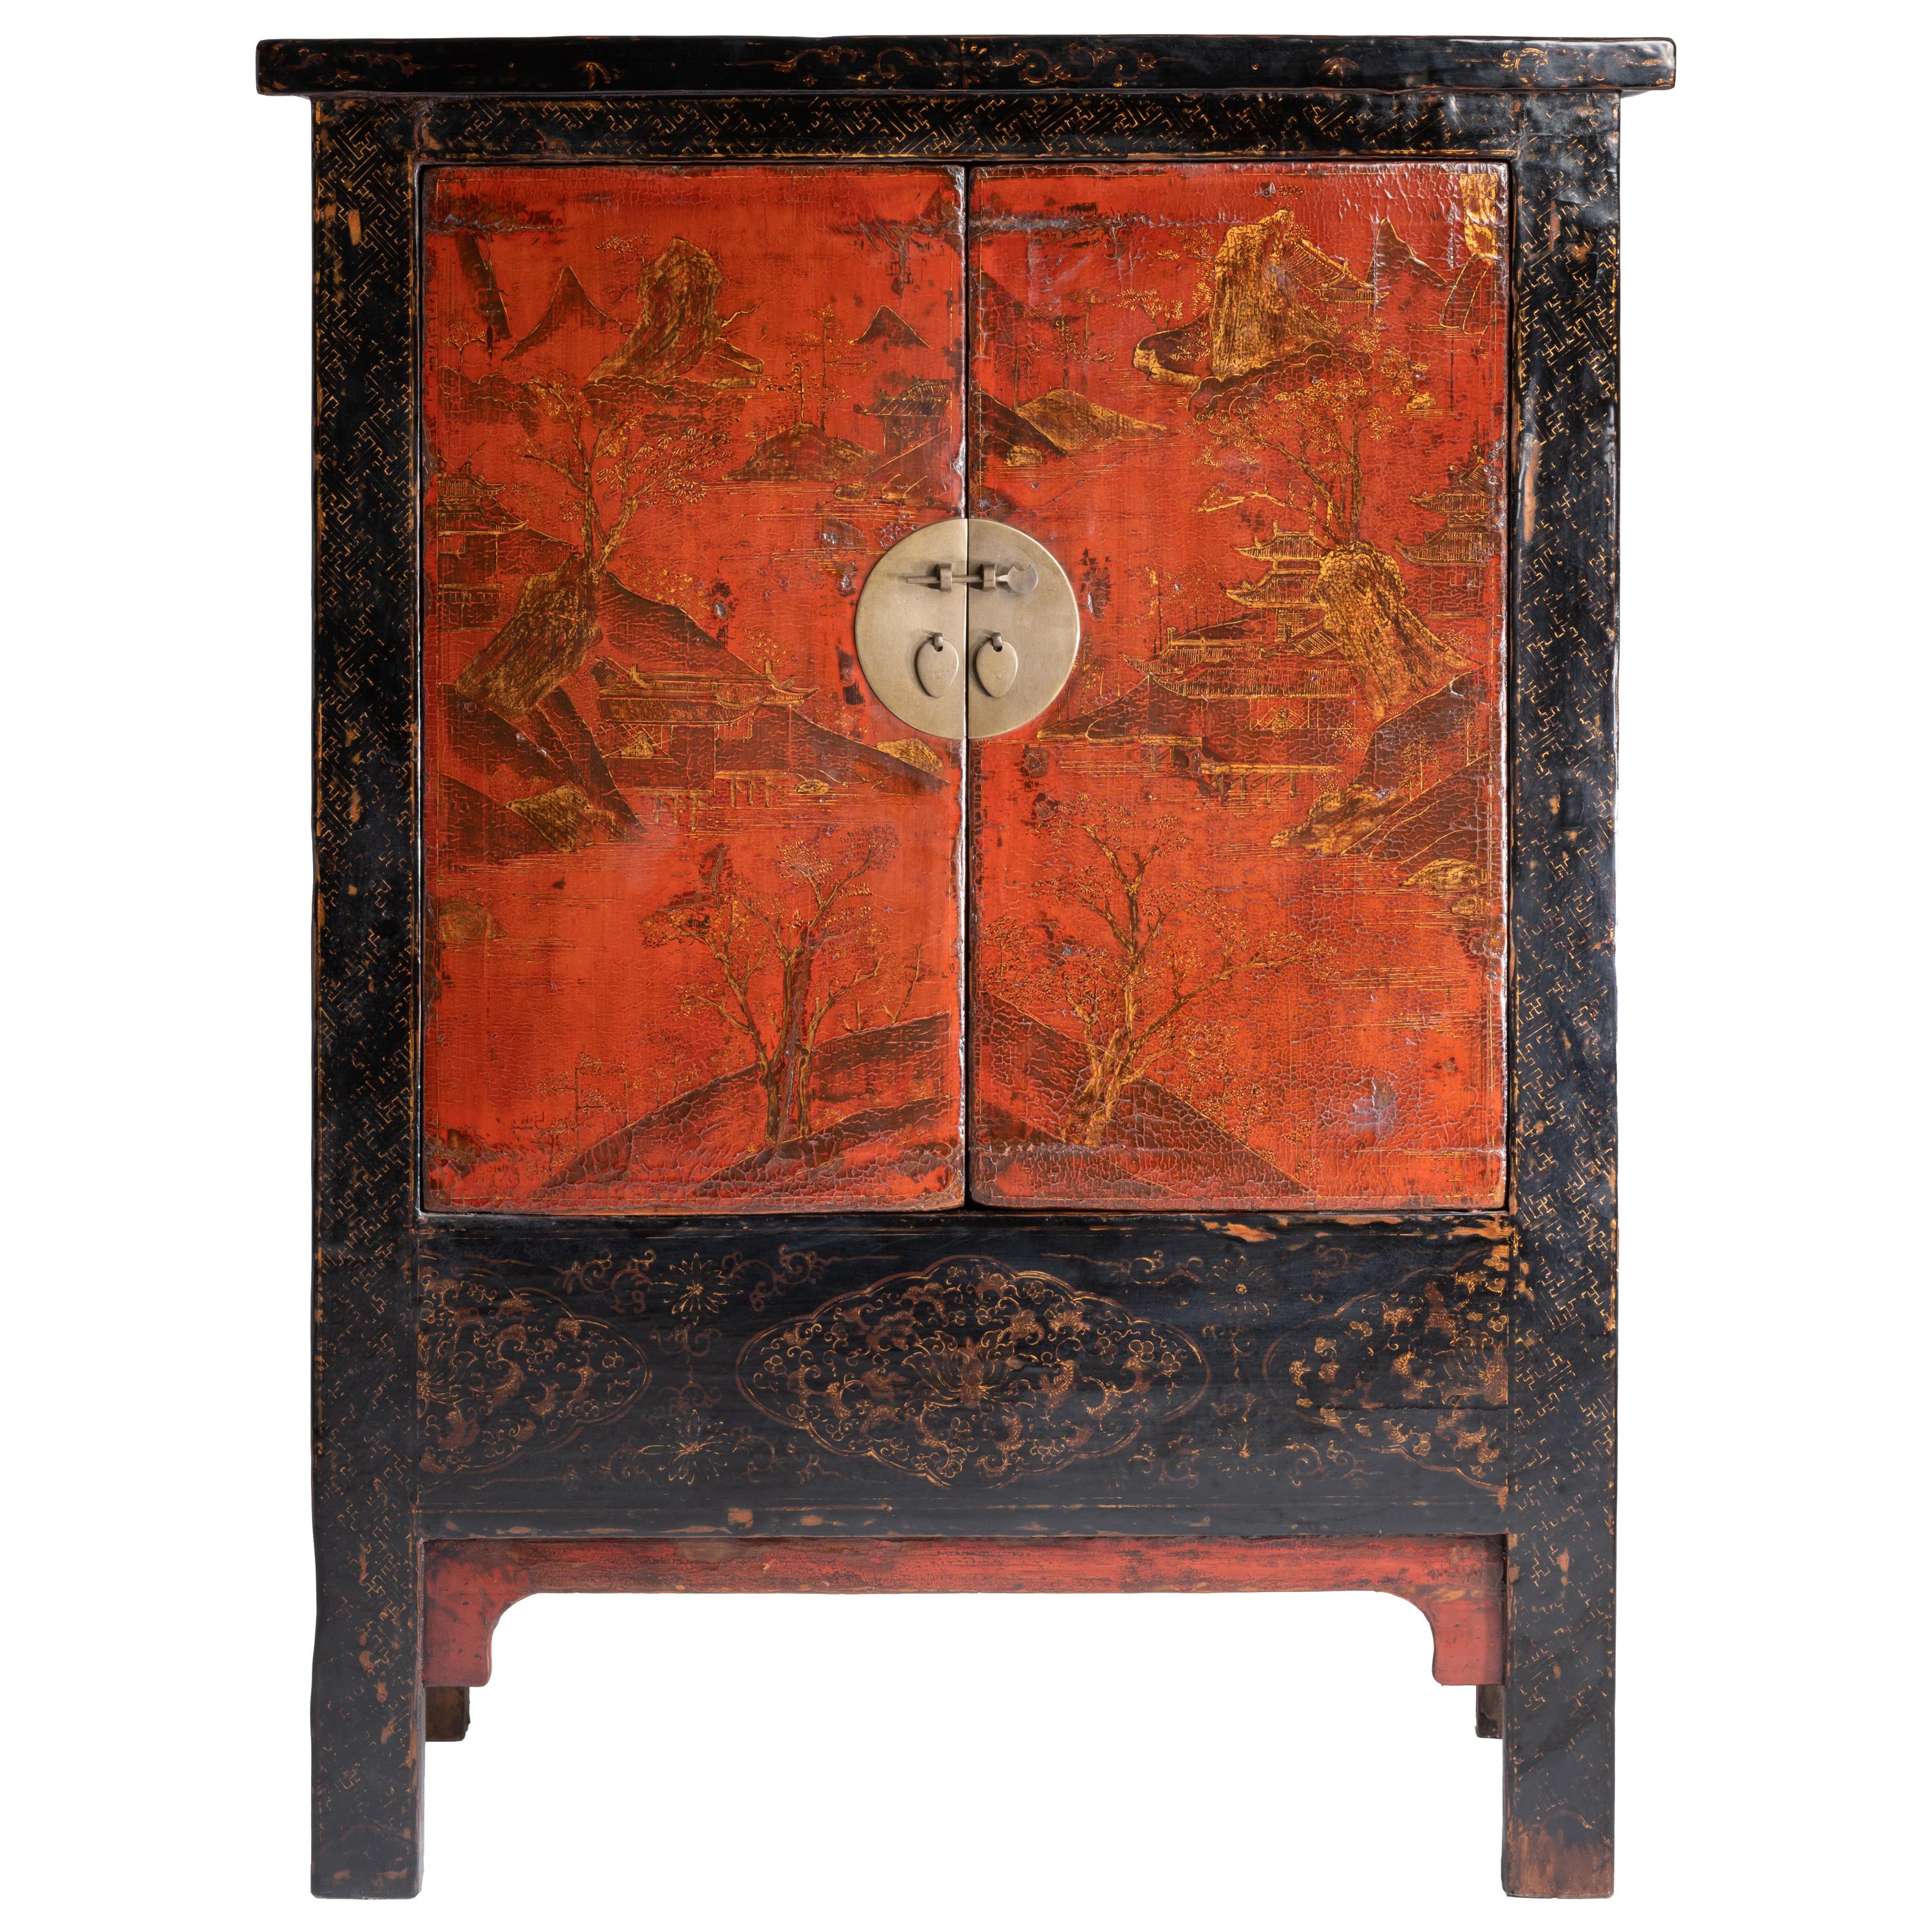 Early Antique Chinese Red and Black Lacquer Cabinet with Gilt Hand-Painting